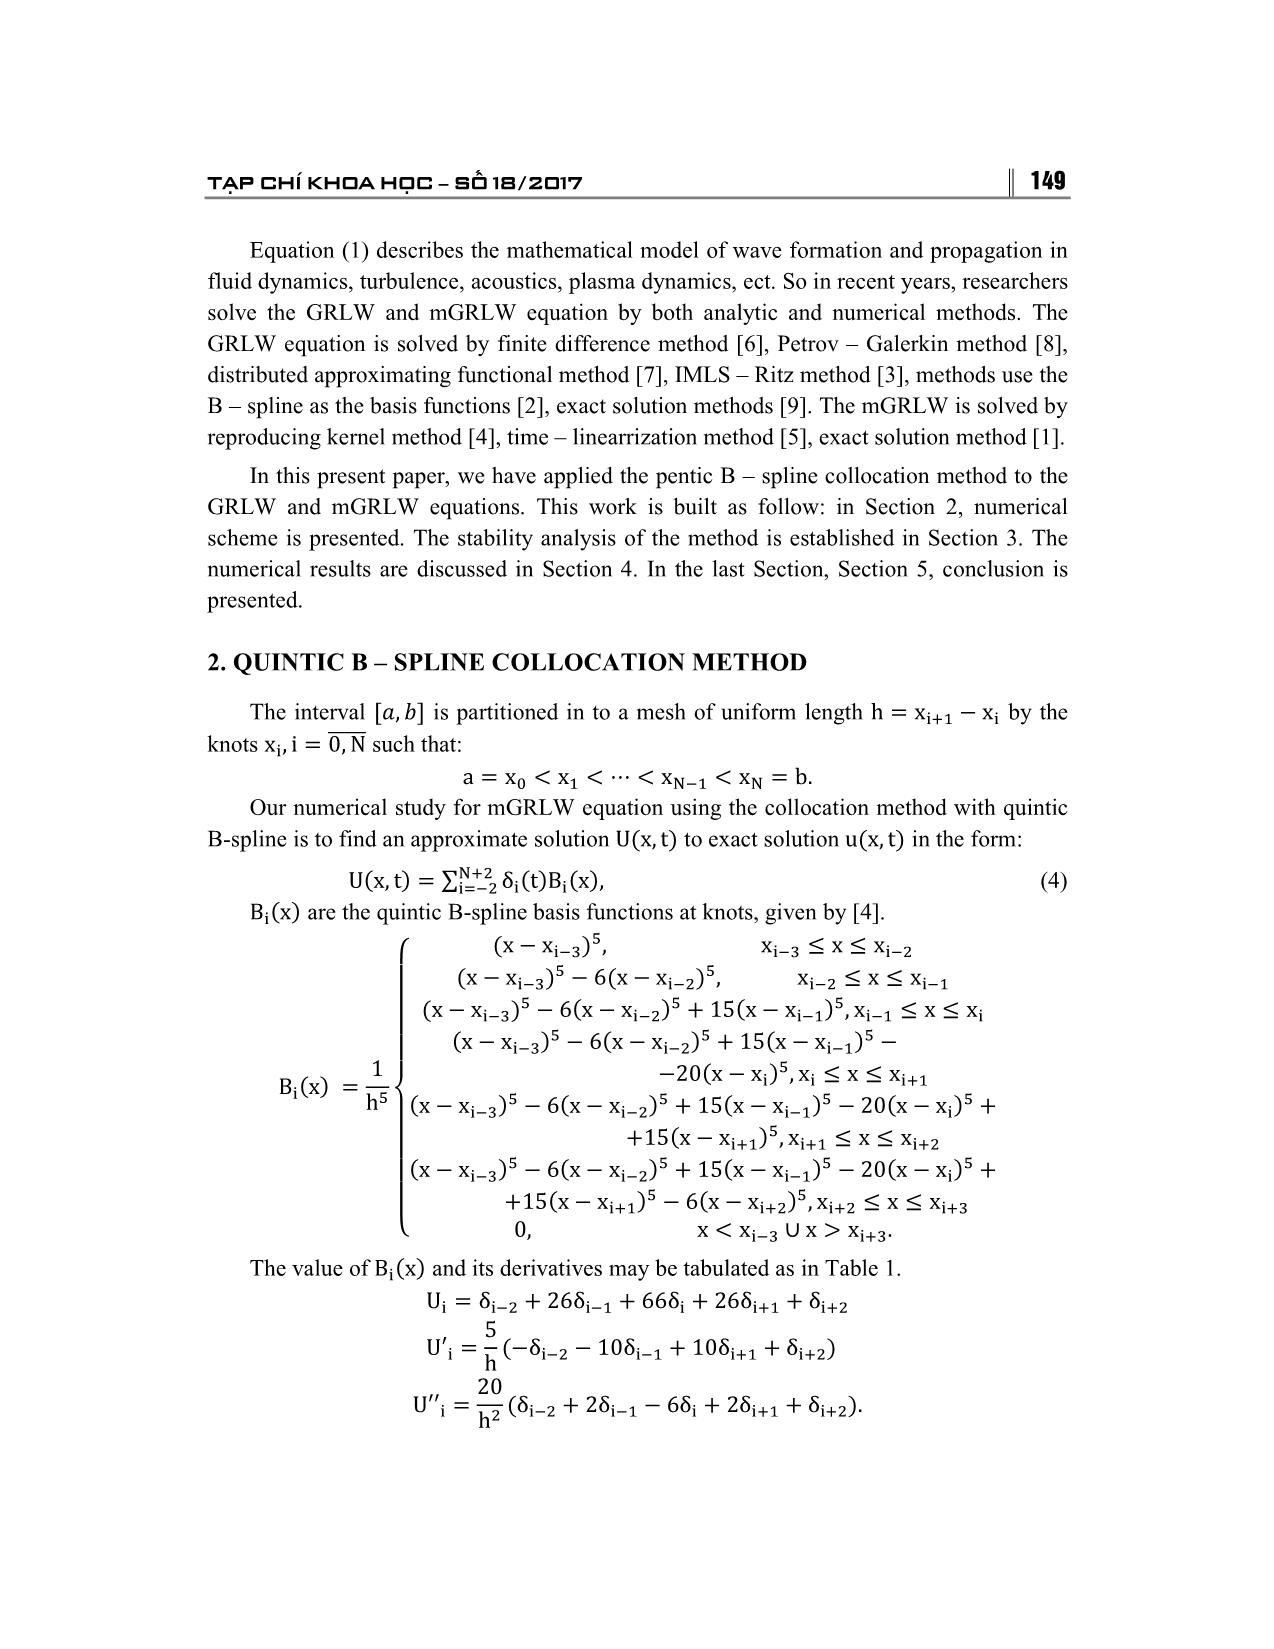 Quintic B-Spline collocation method for numerical solution a modified GRLW equations trang 2